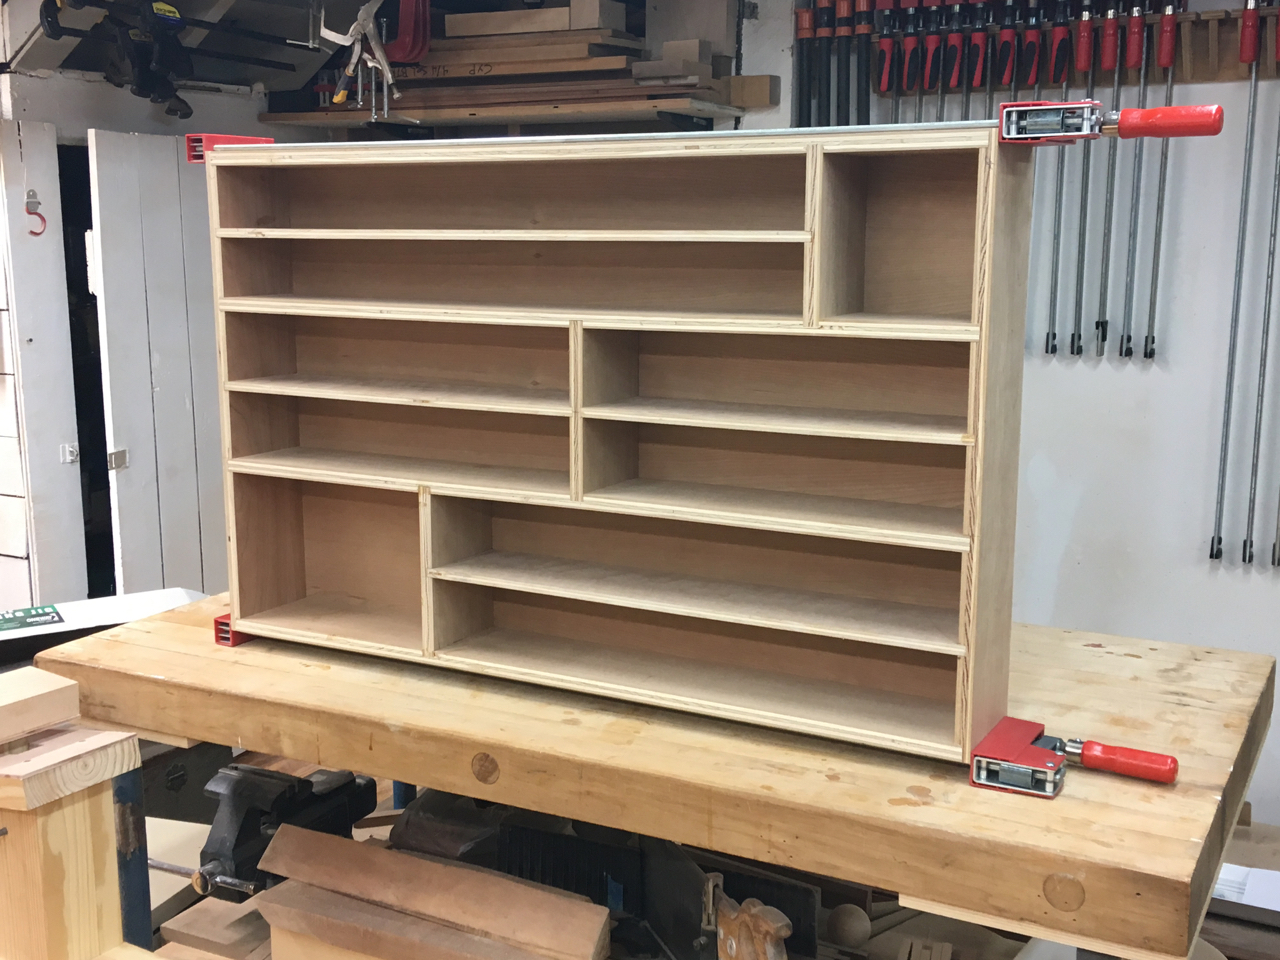 Cabinet carcass complete